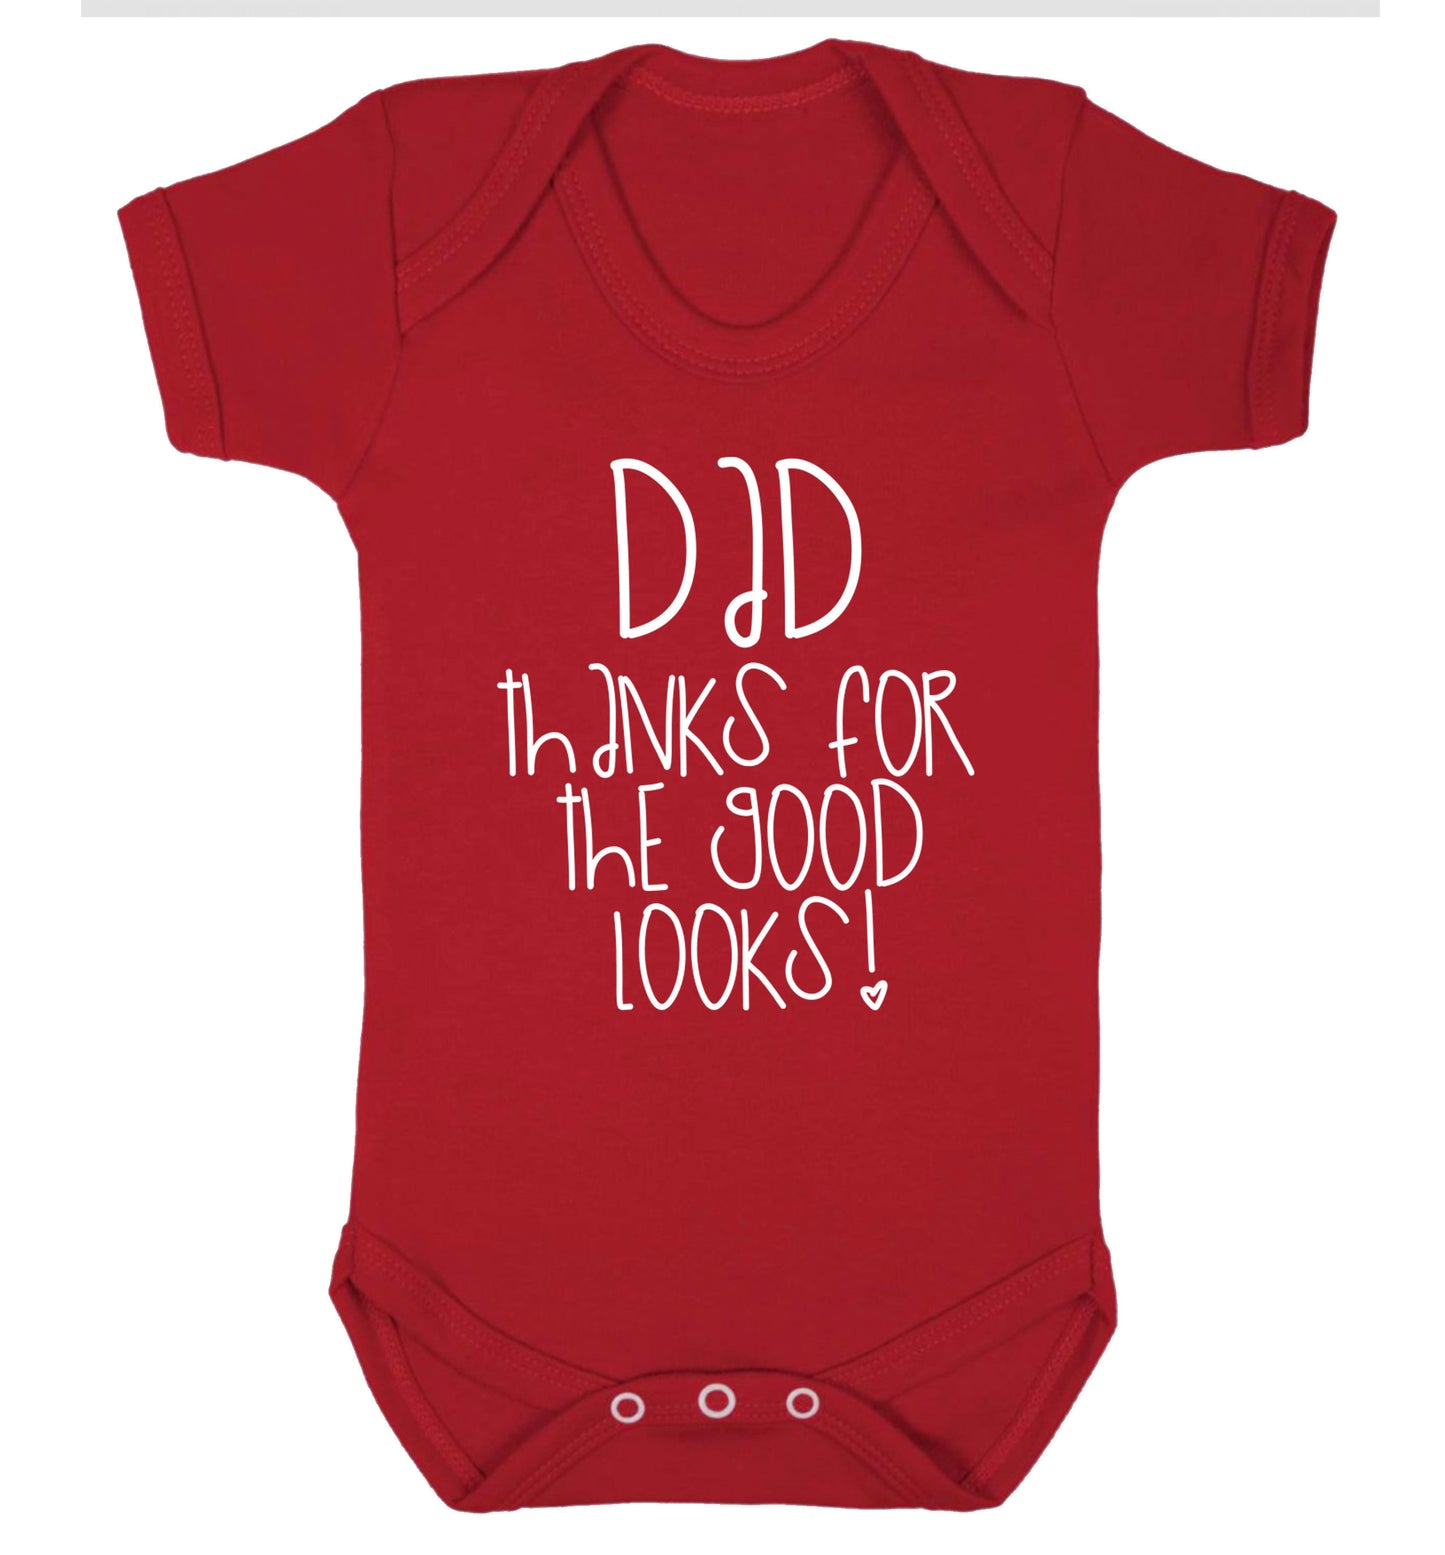 Dad thanks for the good looks Baby Vest red 18-24 months